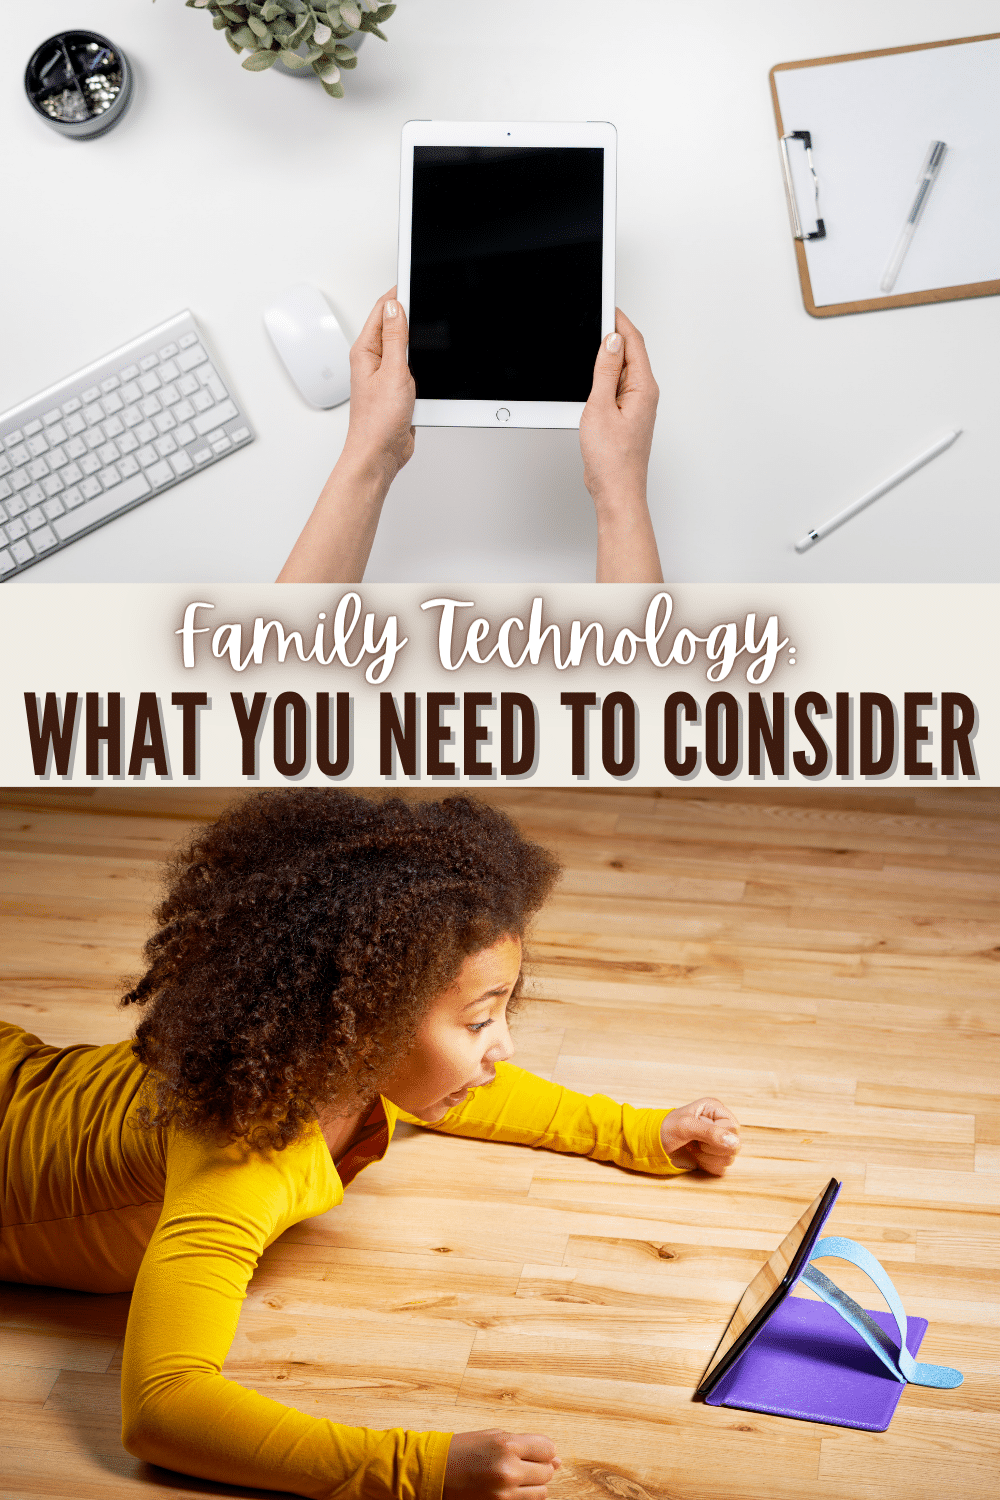 Family technology is a major issue for most parents. If you're worried about its effect on your family, here are some helpful resources. #familytechnology #parentingtips #parentingresources via @wondermomwannab